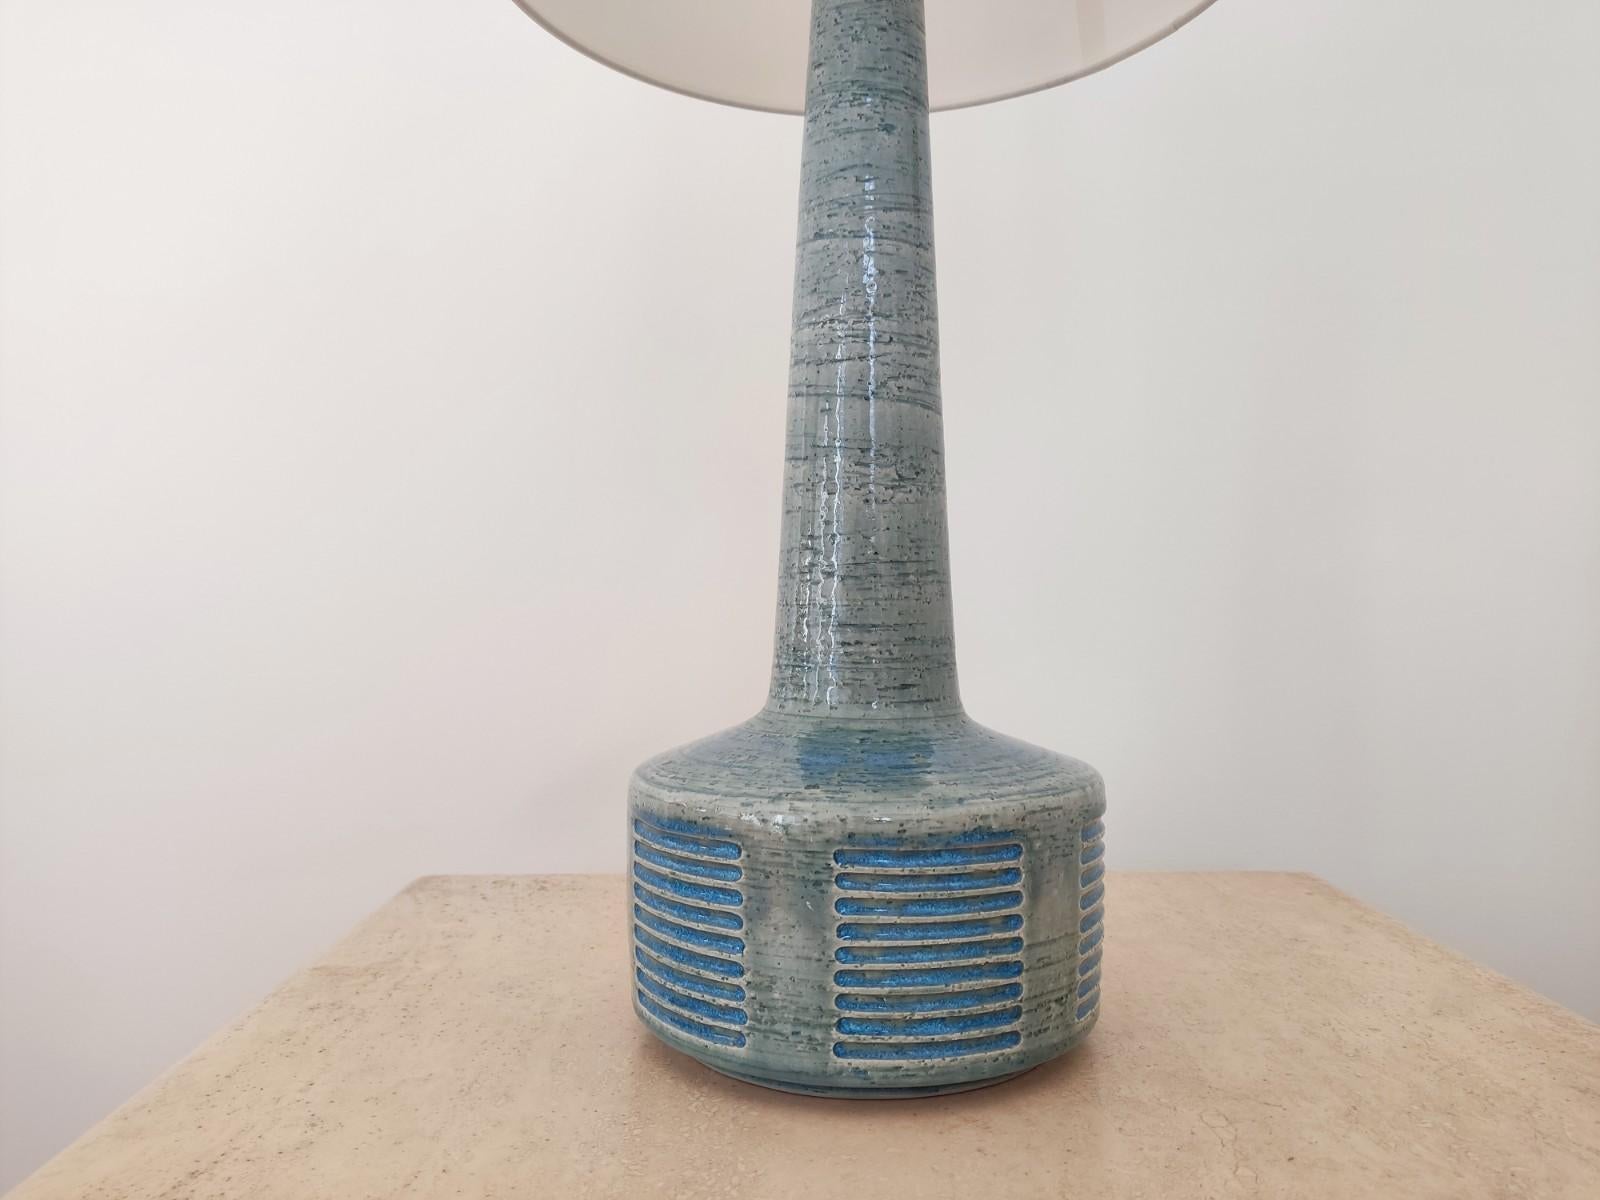 Rare Danish Palshus table lamp by Per Linnemann Schmidt. Palshus produces work that uses chamotte techniques. This lamp is considered in Denmark as the crown jewels.
The lampshade and electrical system are new.

Palshus Pottery was founded by